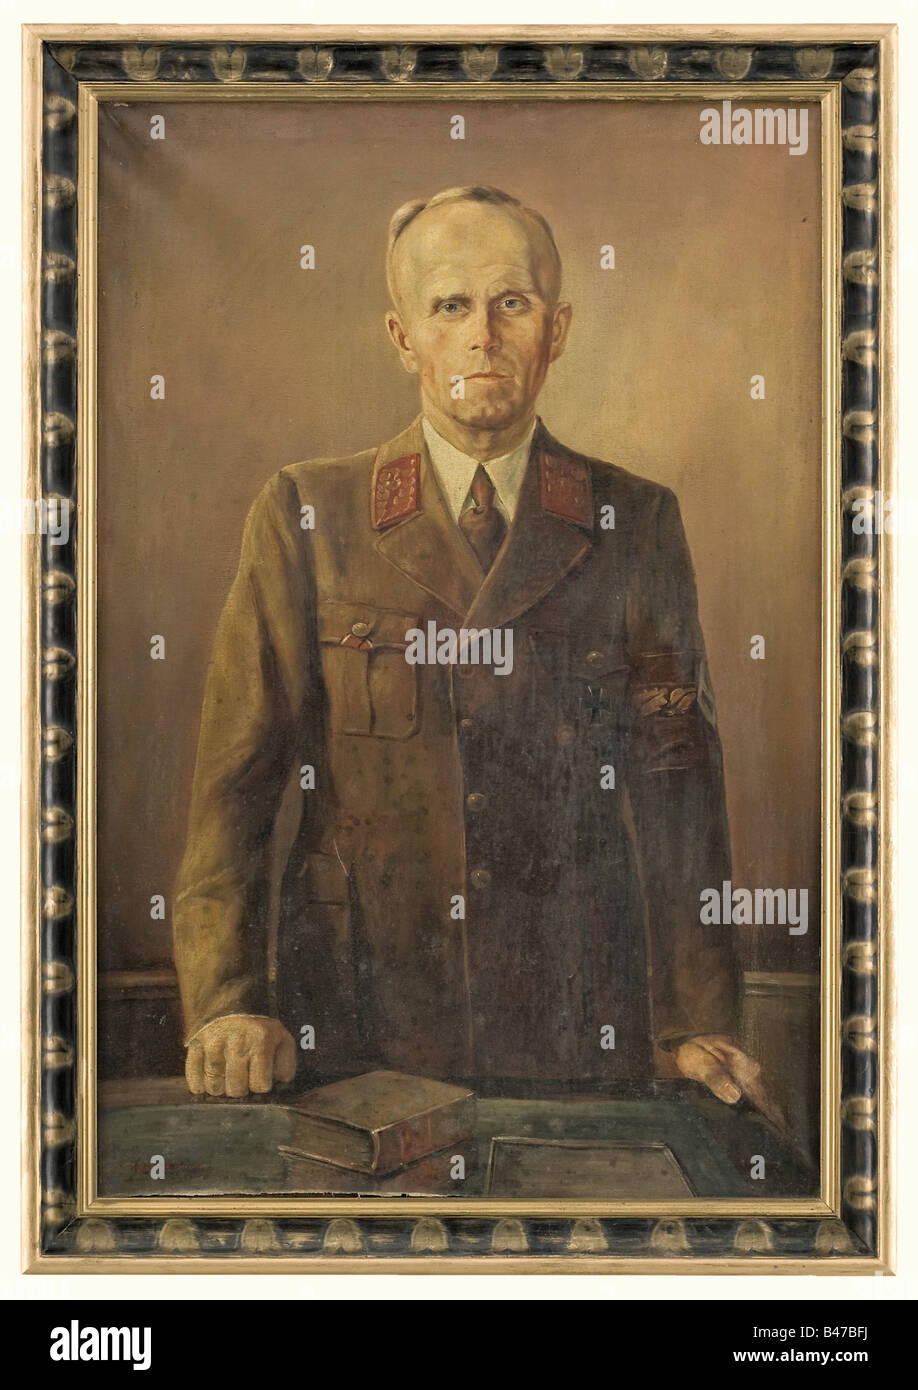 Hugo Lehmann, a portrait of the Gauleiter Karl Wahl Oil on canvas, on the lower left the atist's signature 'Hugo Lehmann' in red. Damaged on the lower edge, slightly stained. Size framed 72 x 103 cm. Portrayal of Wahl in party uniform in his study, his hands resting on a desk. Karl Wahl, Gauleiter of the gau Swabia (1st October 1928 - 8th May 1945). He received several medals for bravery, such as the Iron Cross 1st and 2nd Class, as a staff sergeant of the medical corps in WW I. 1919 head of the garrison hospital in Augsburg. 1922 NSDAP membership, appointment , Stock Photo